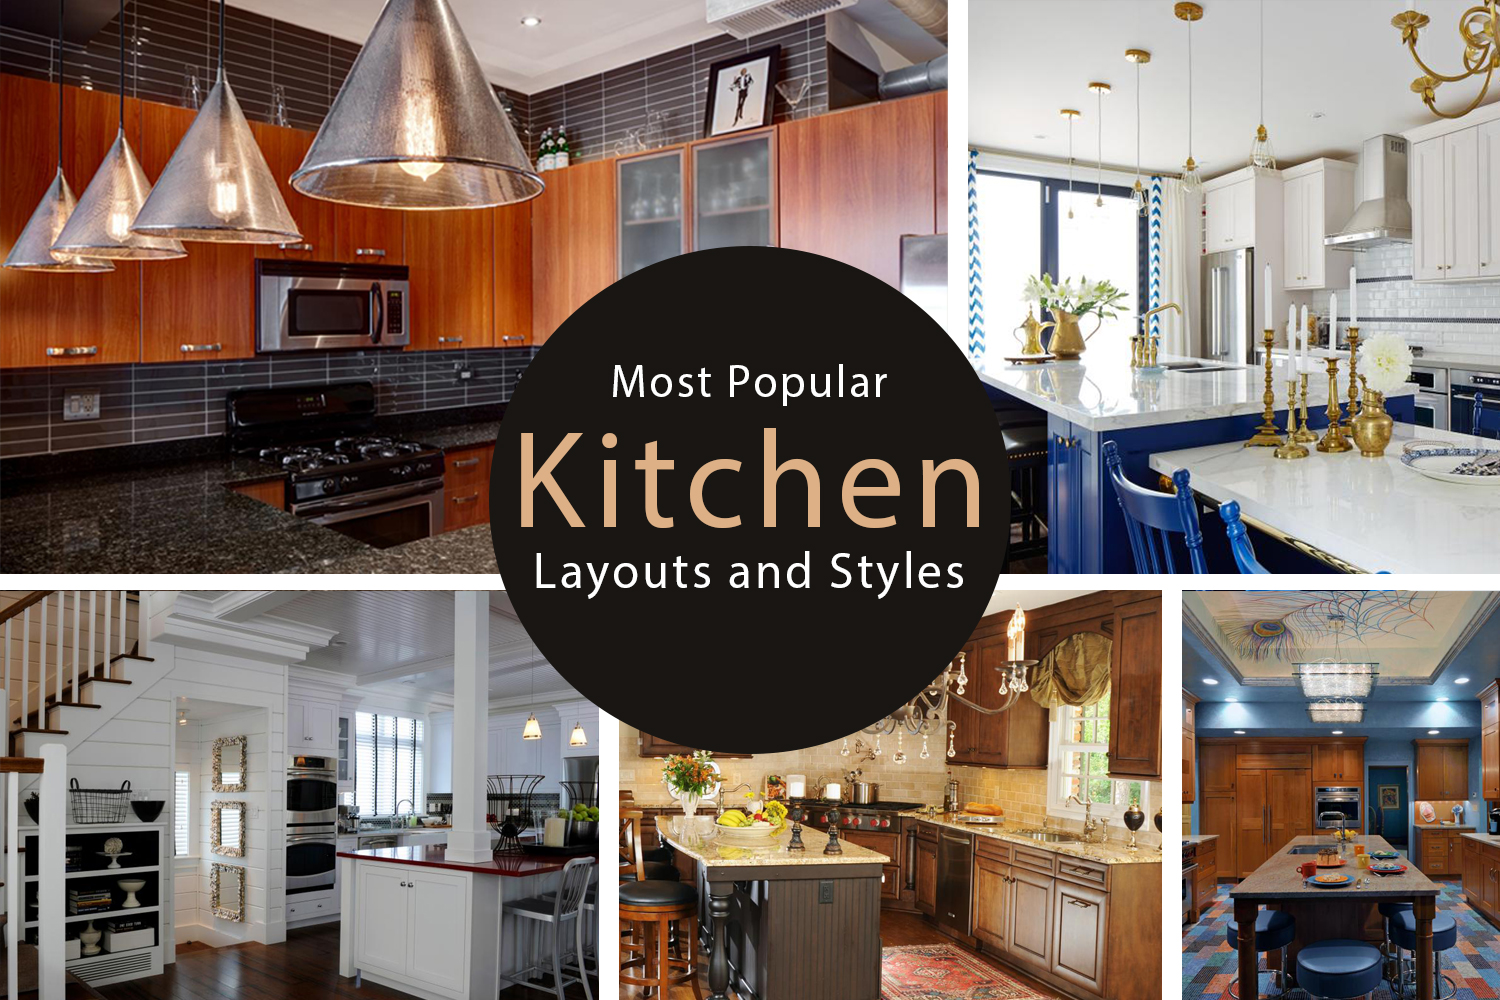 Most Popular Kitchen Layouts and Styles